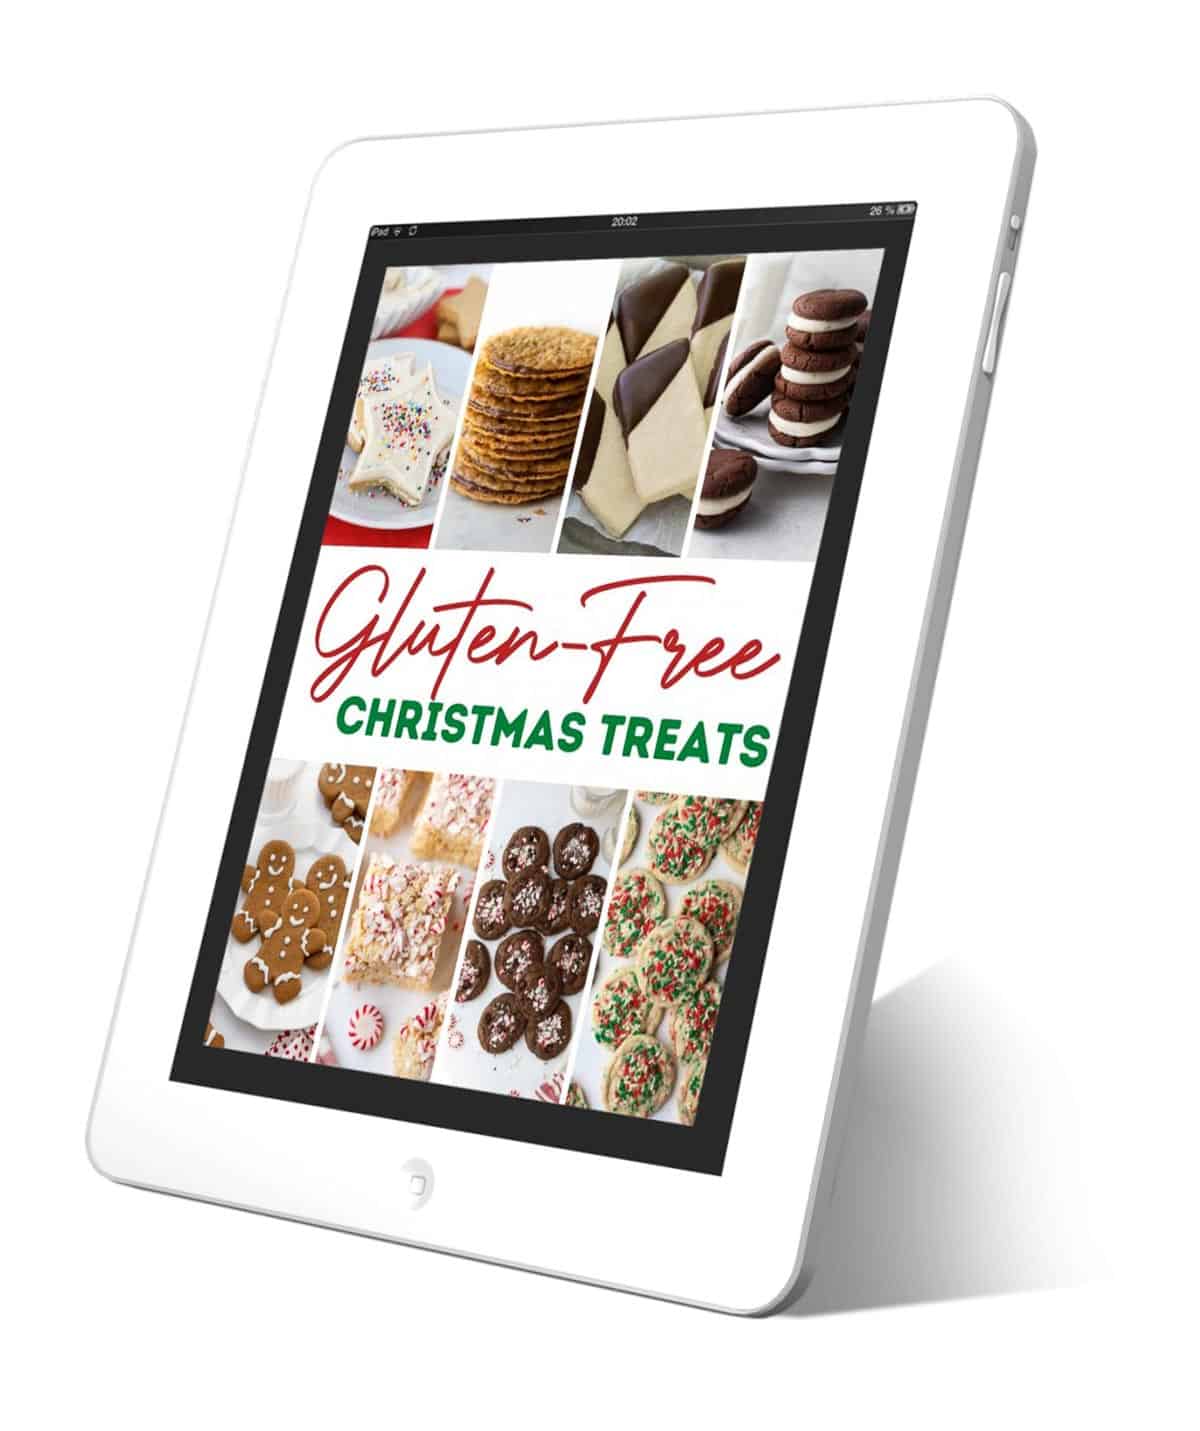 cover image for gluten-free christmas treat recipes ebook on ipad screen